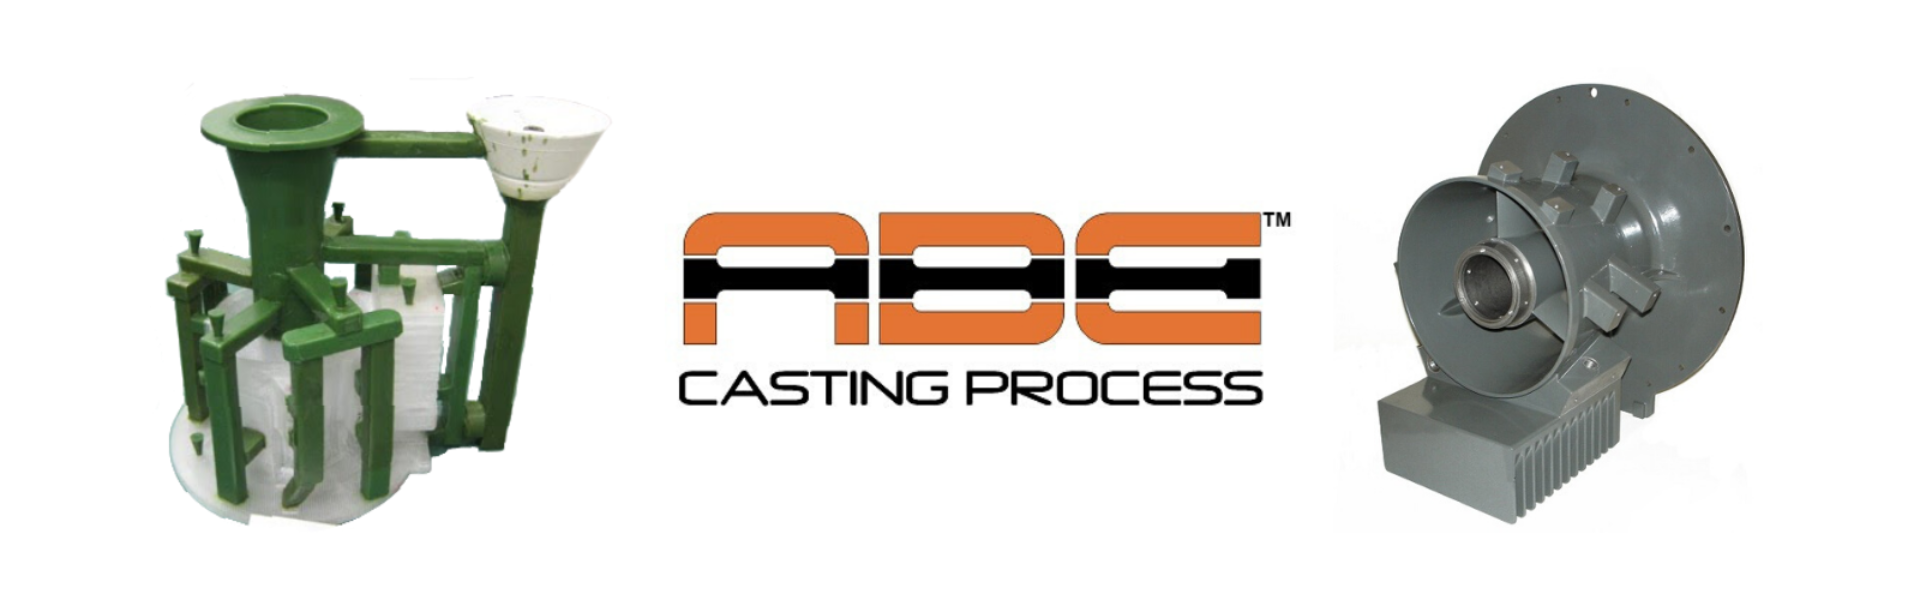 AW Bell Machinery - Experts in Casting